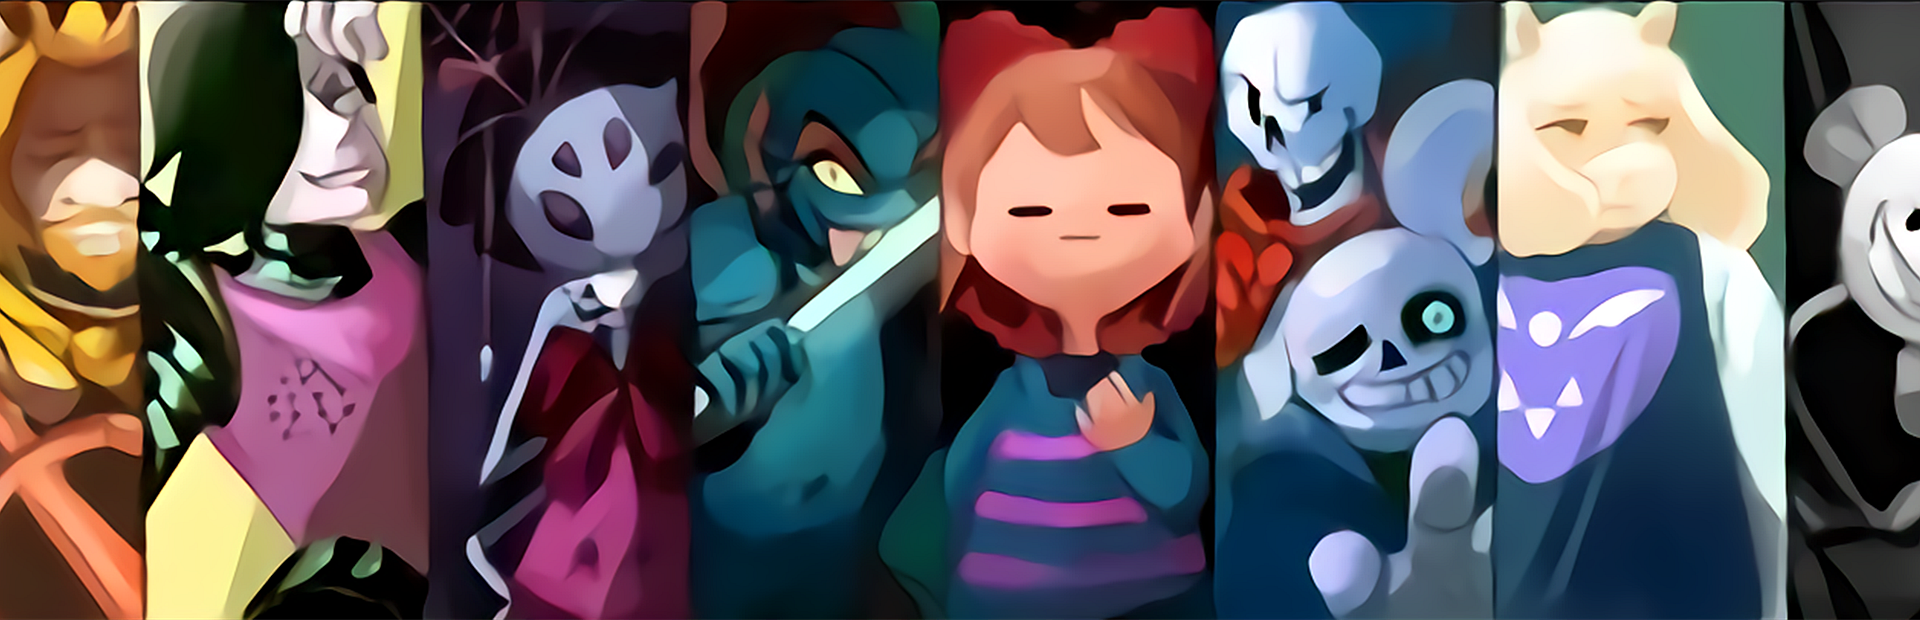 Steam Community :: Guide :: Undertale Characters